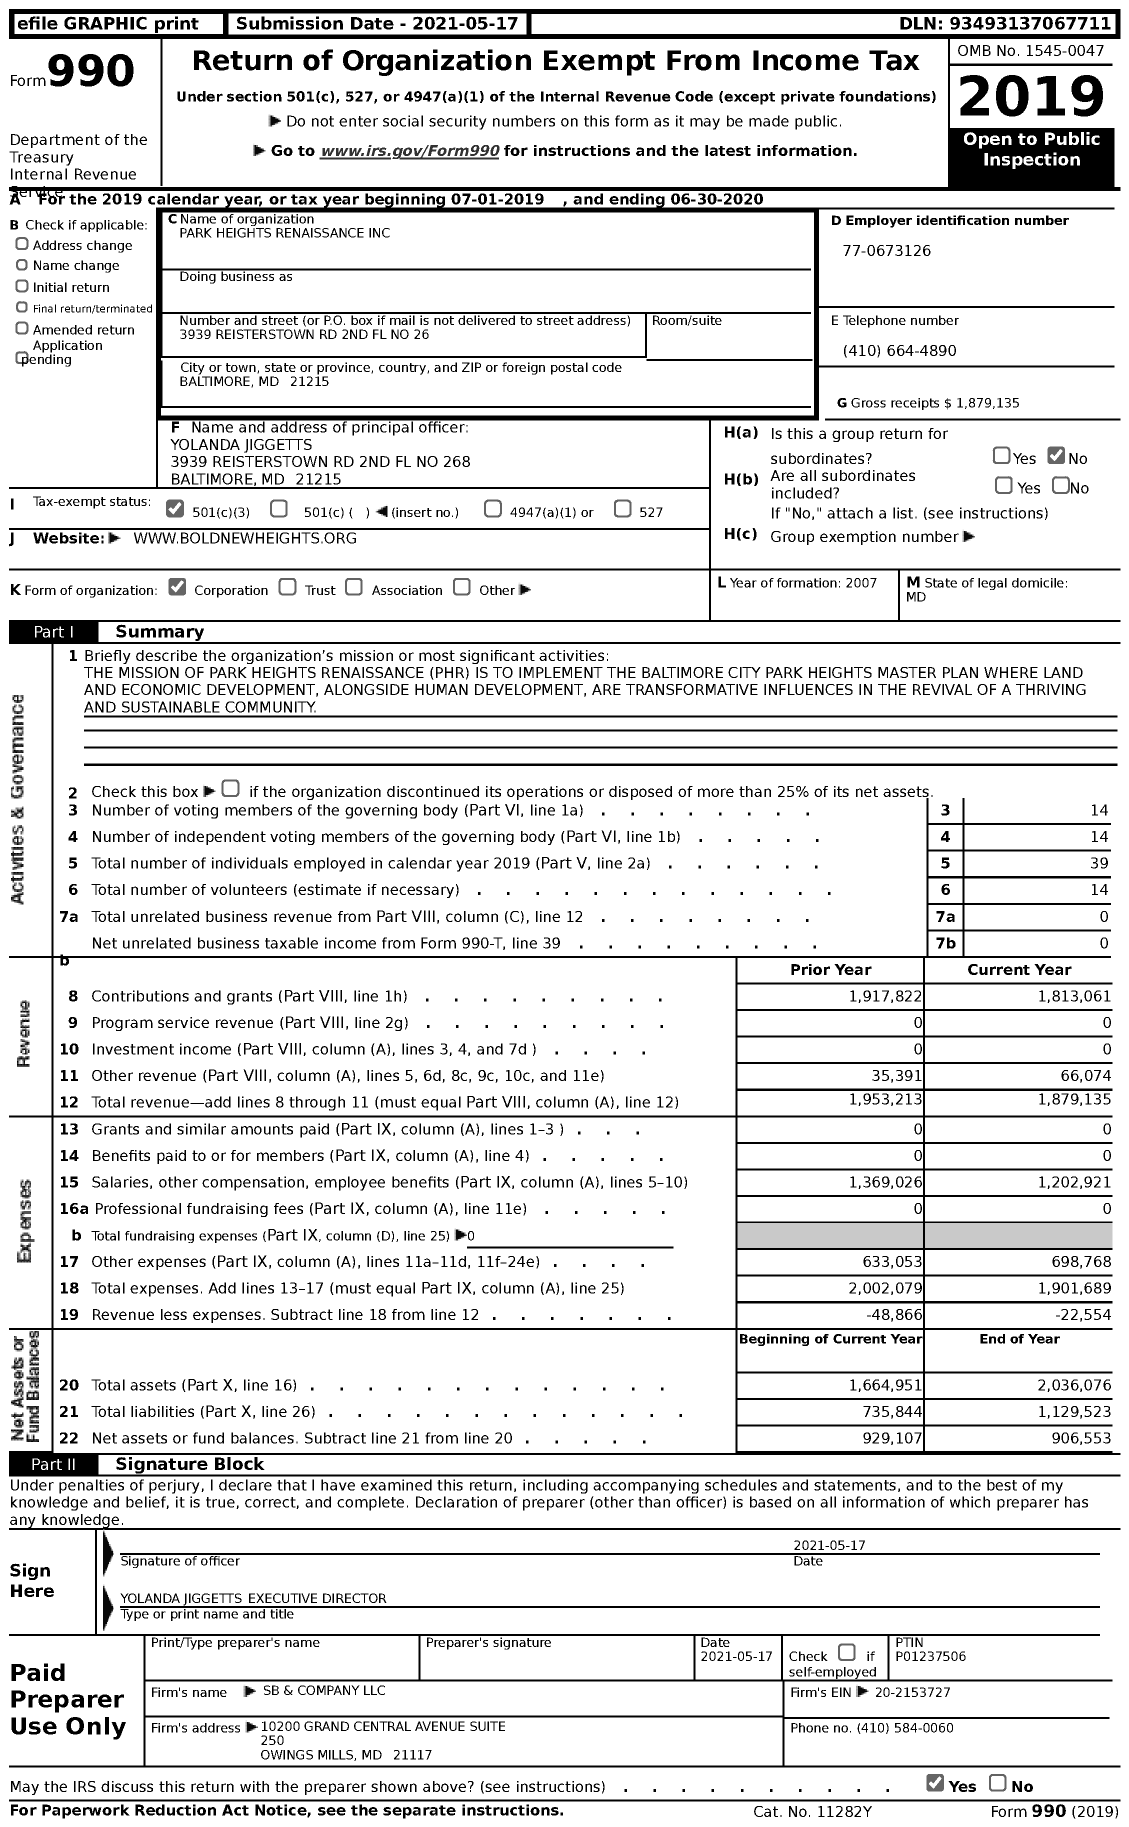 Image of first page of 2019 Form 990 for Park Heights Renaissance